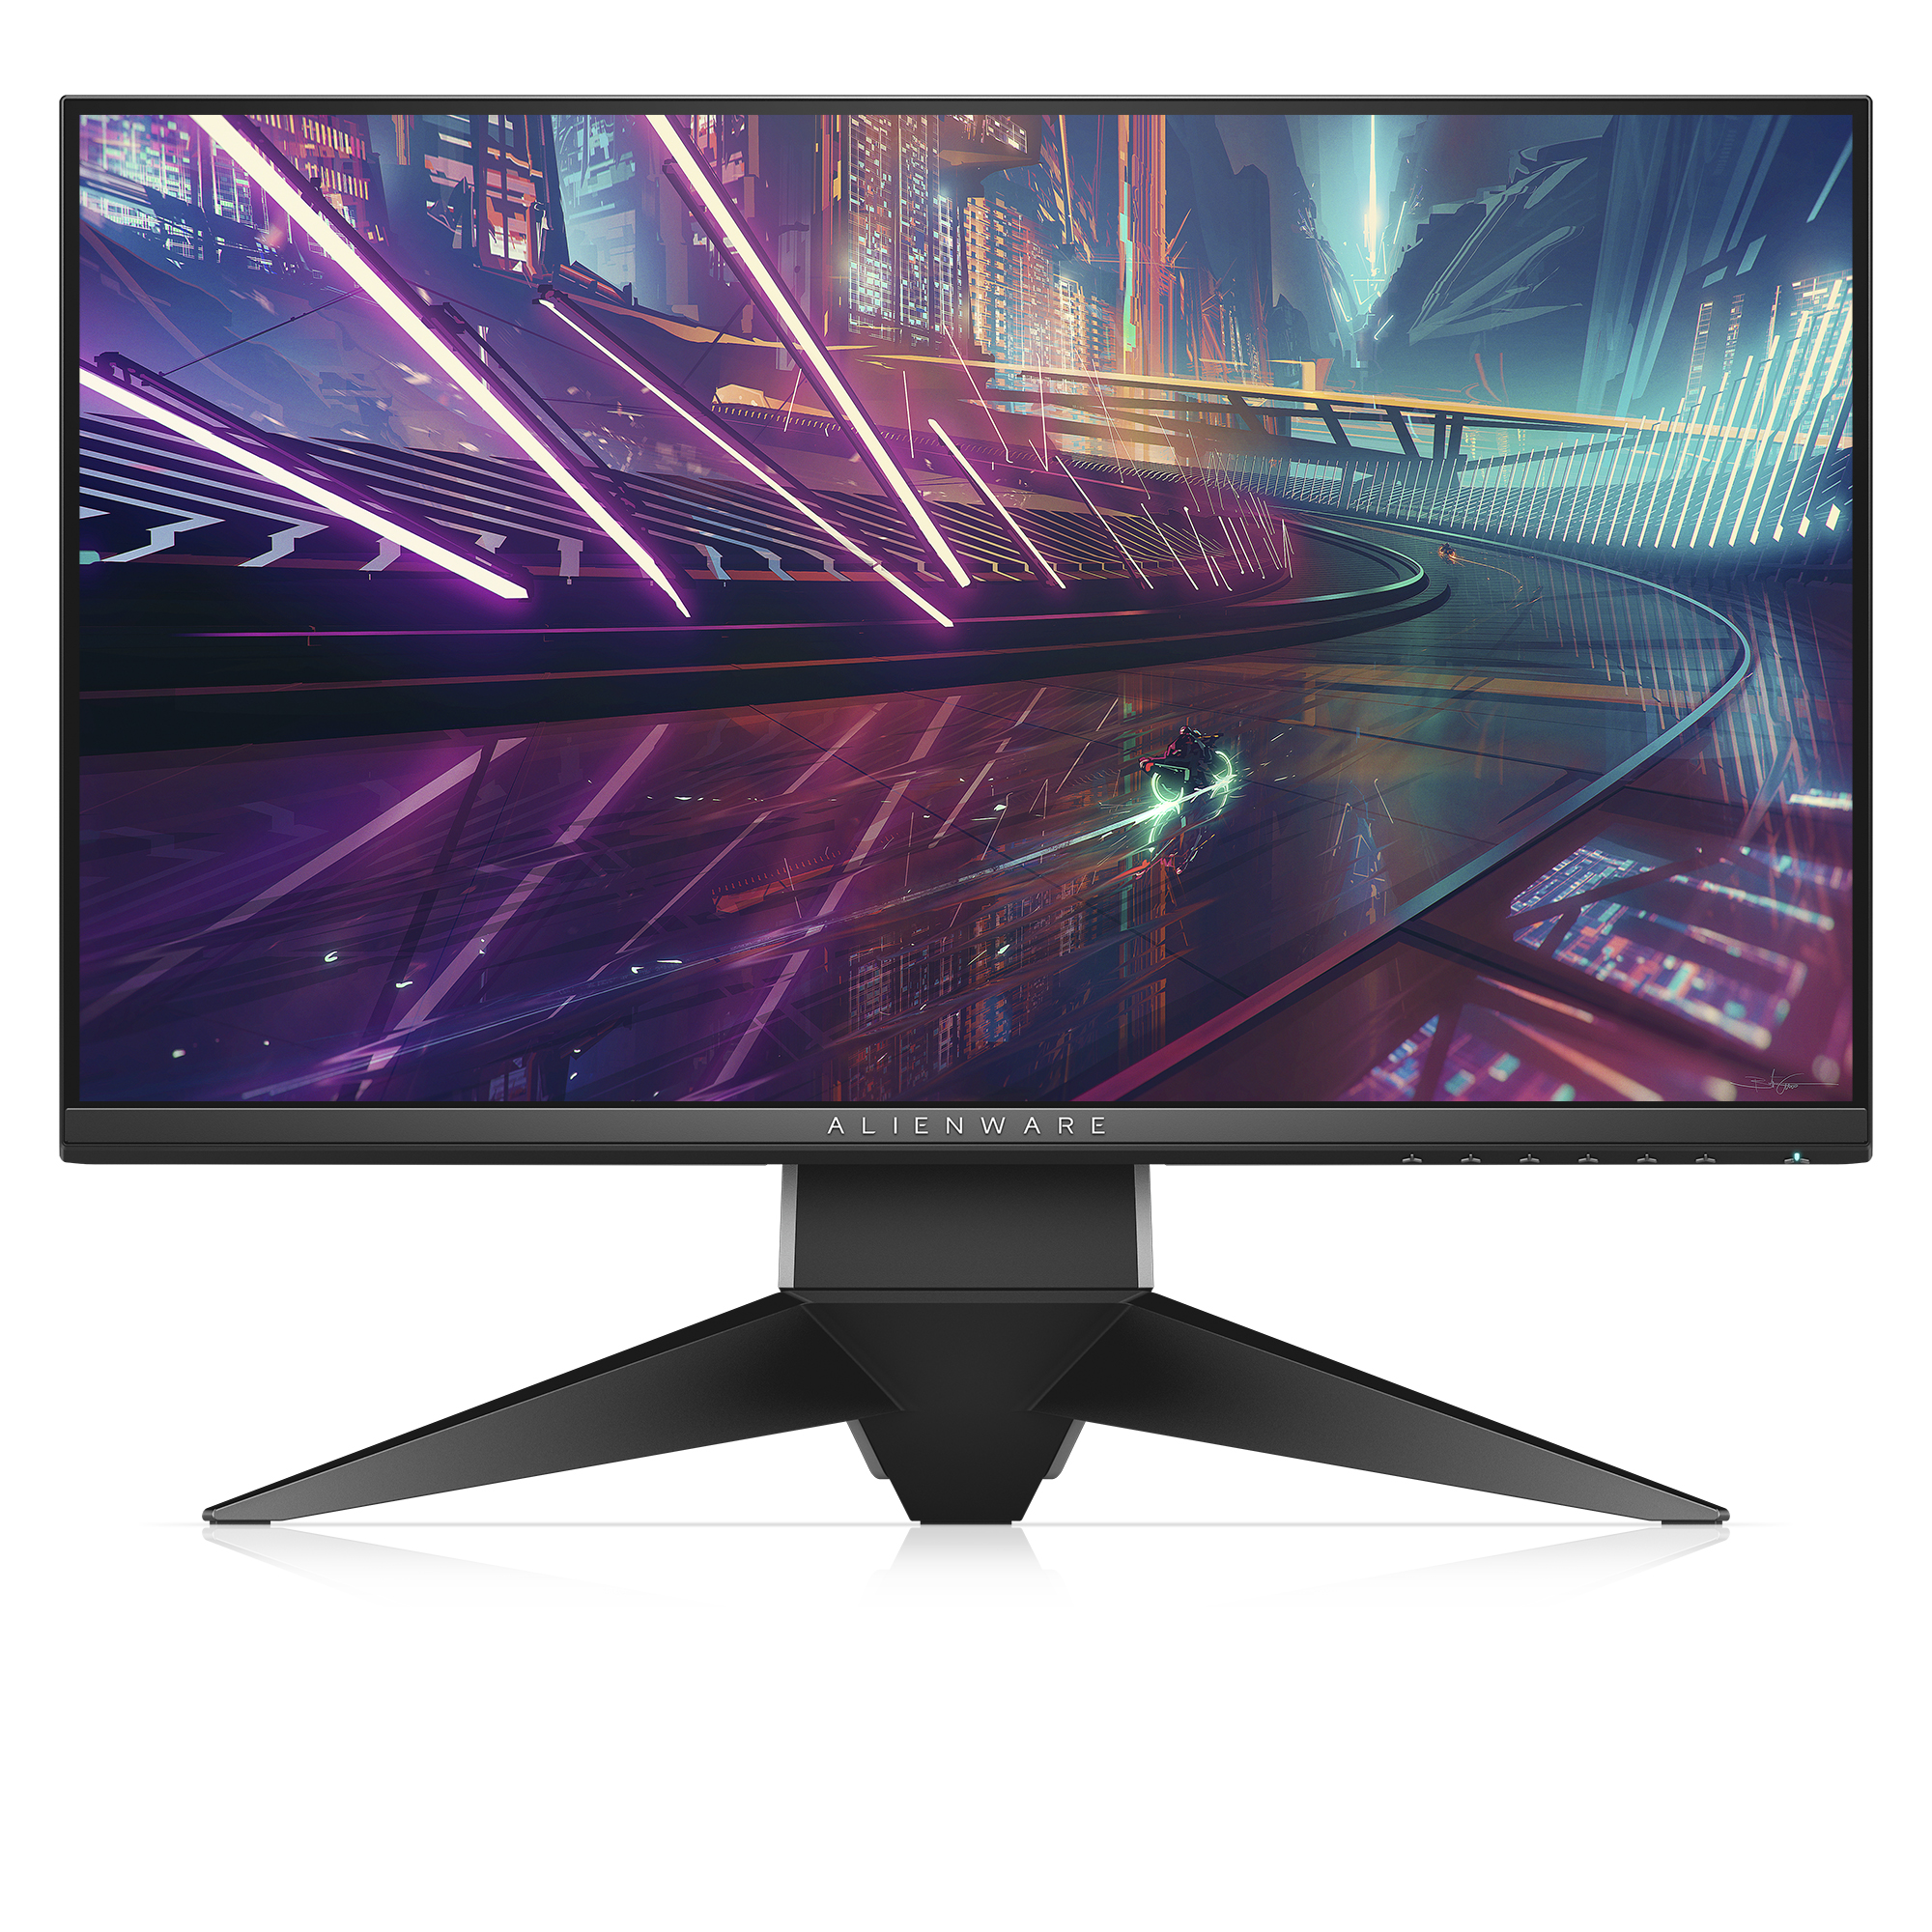 Alienware 25" 1920x1080 HDMI DP USB 3.0 240hz 1ms NVIDIA G-SYNC HD LCD Gaming monitor - AW2518H - image 1 of 11